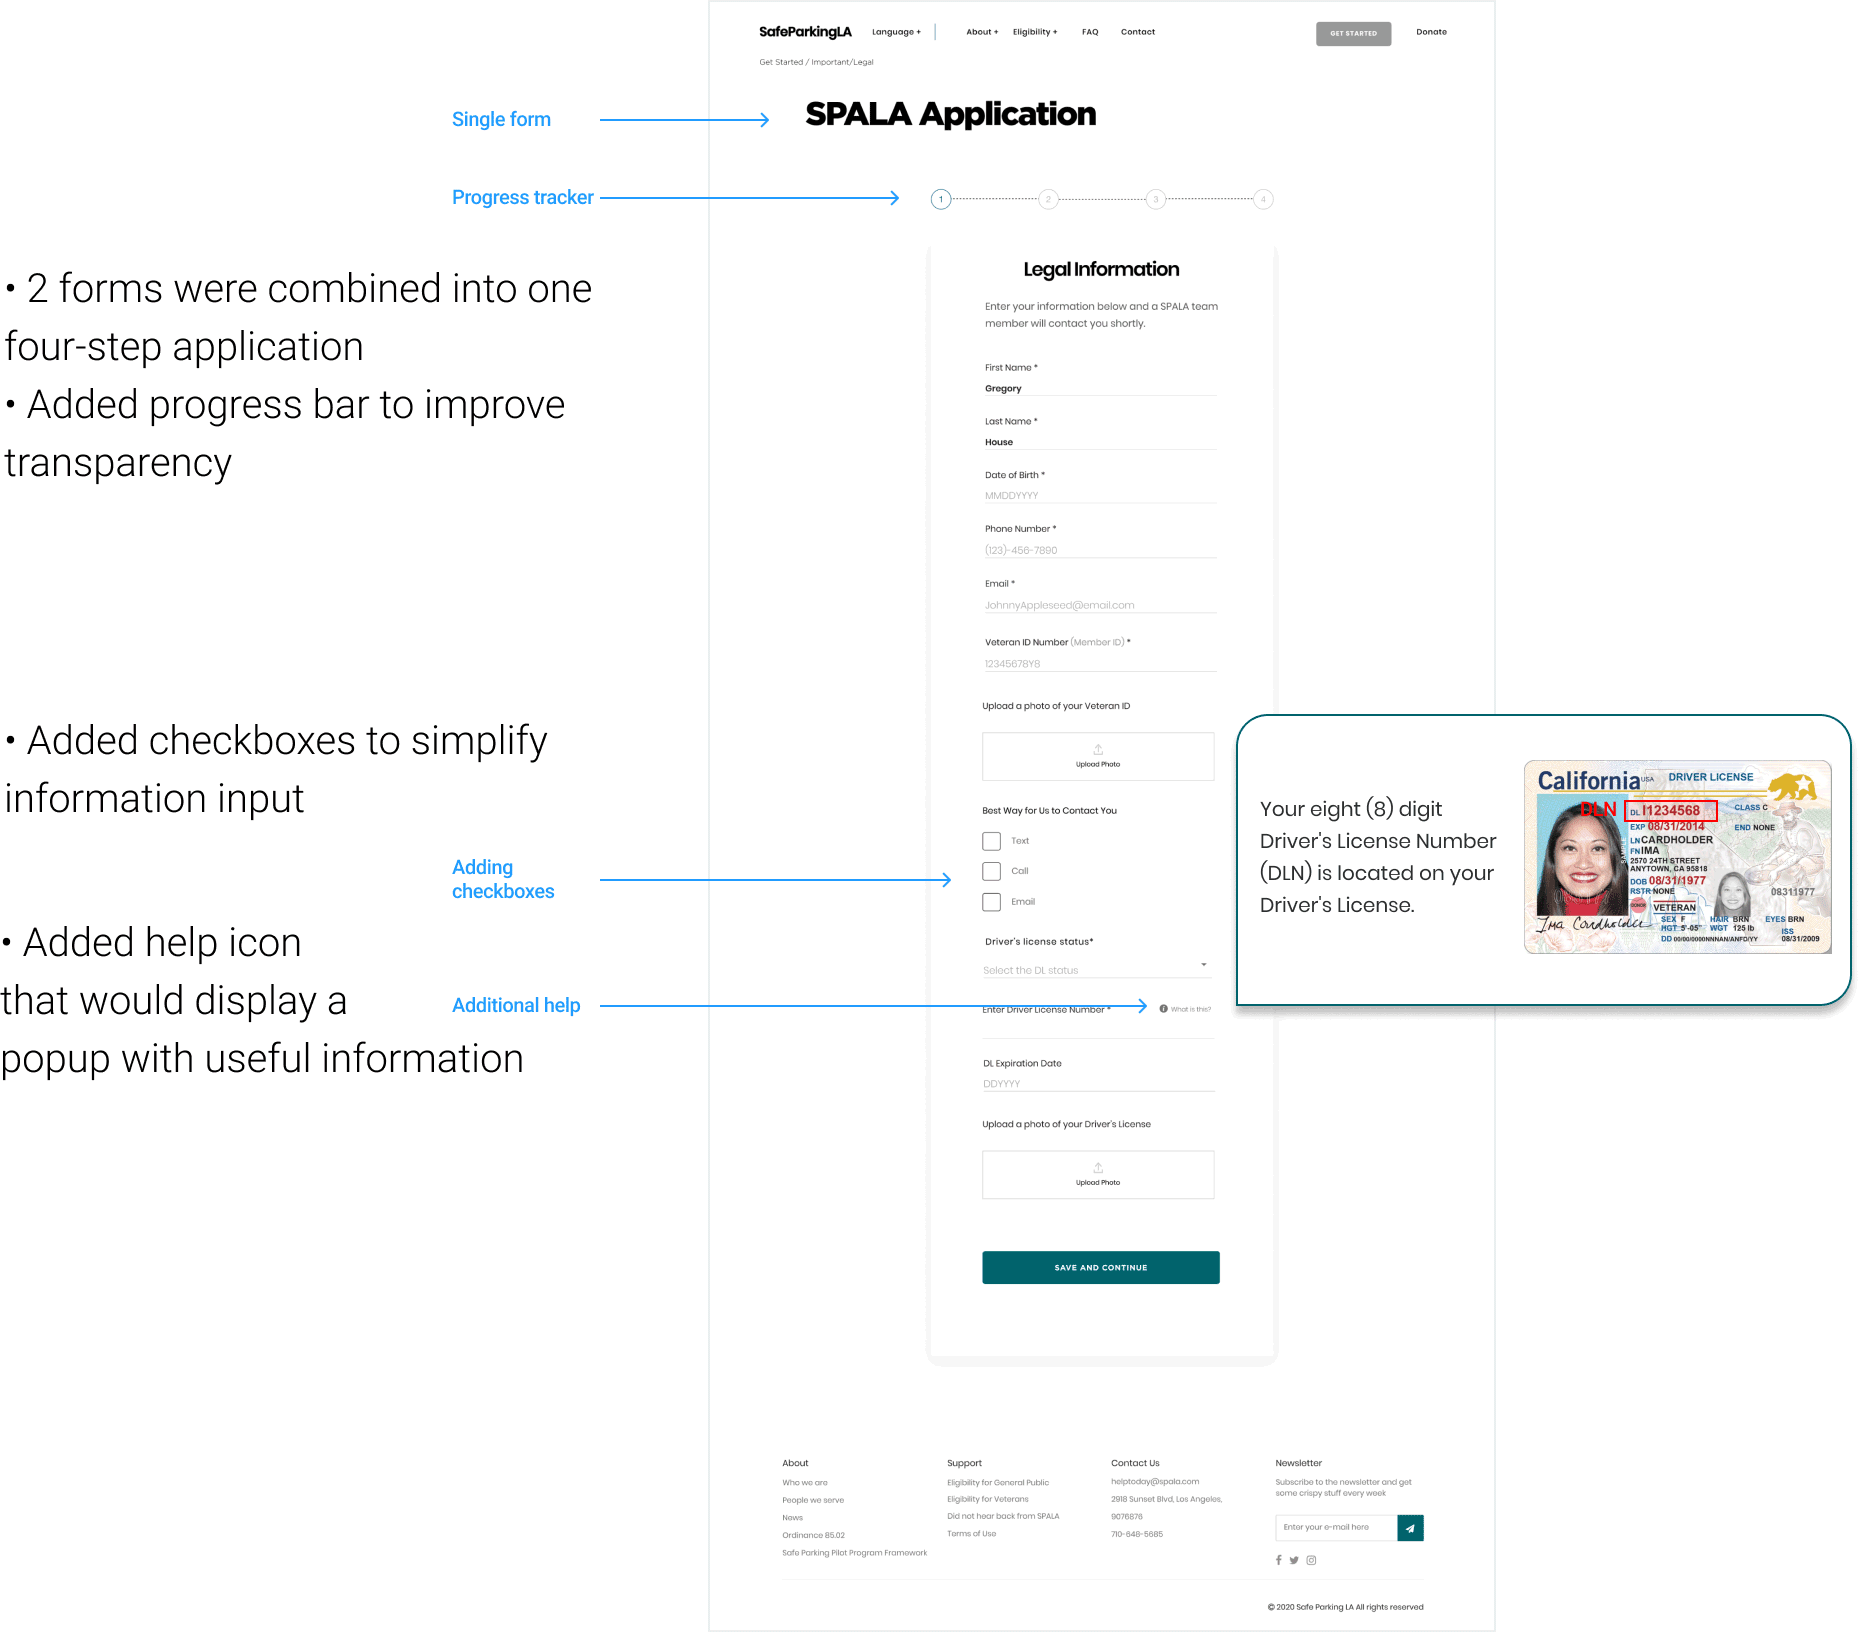 Application redesign